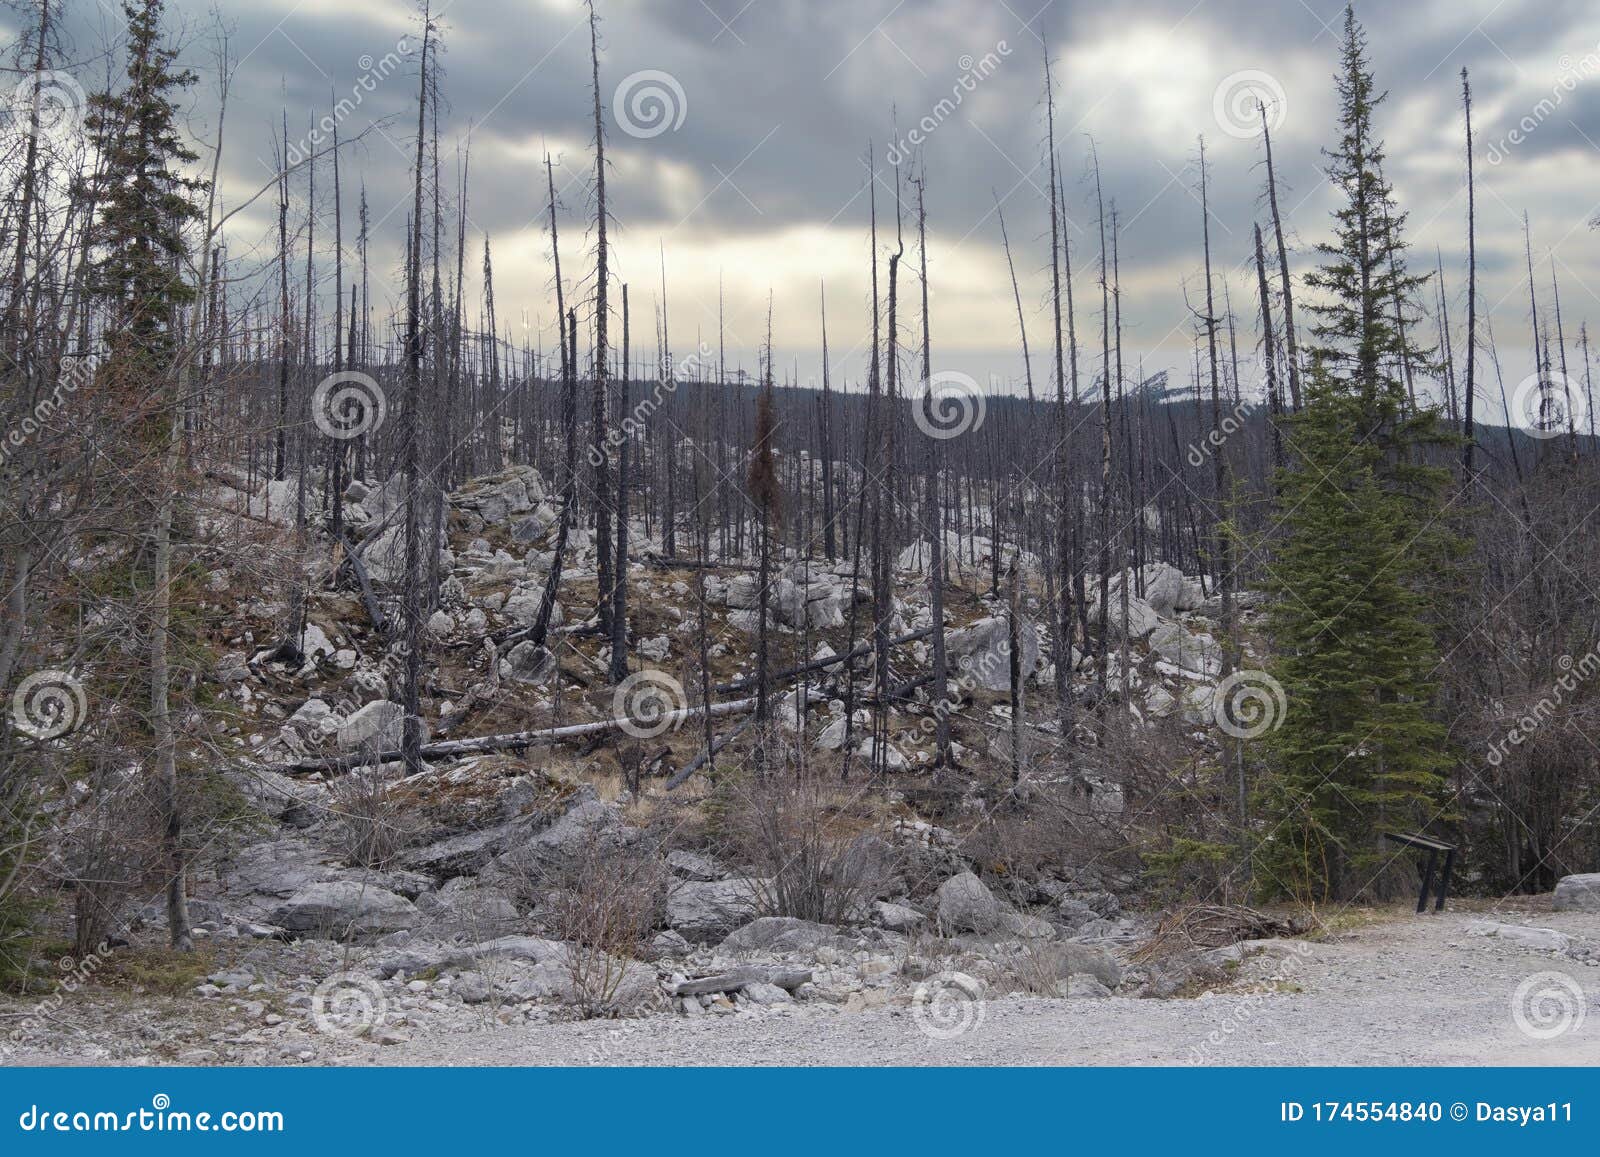 dead trees destroyed by forest fire, canada